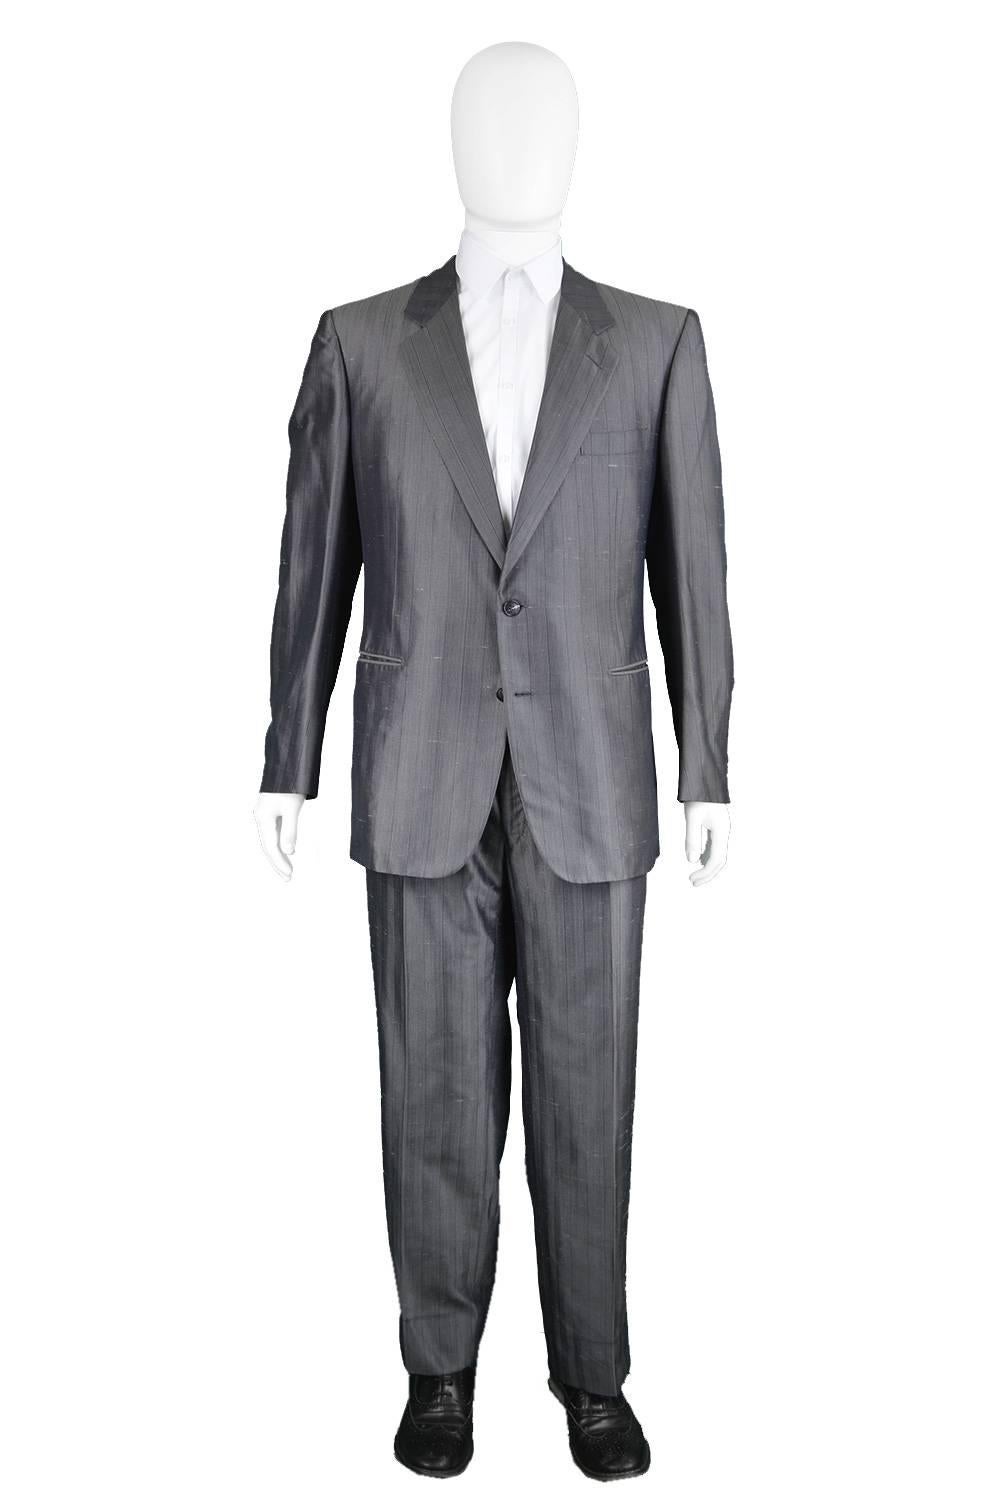 An incredibly luxurious vintage Christian Dior Monsieur Suit in a grey slub silk with incredible sheen  and pinstripes throughout. With narrow, notched lapels, welt pockets and single breasted buttons which create such a timeless look. Made in